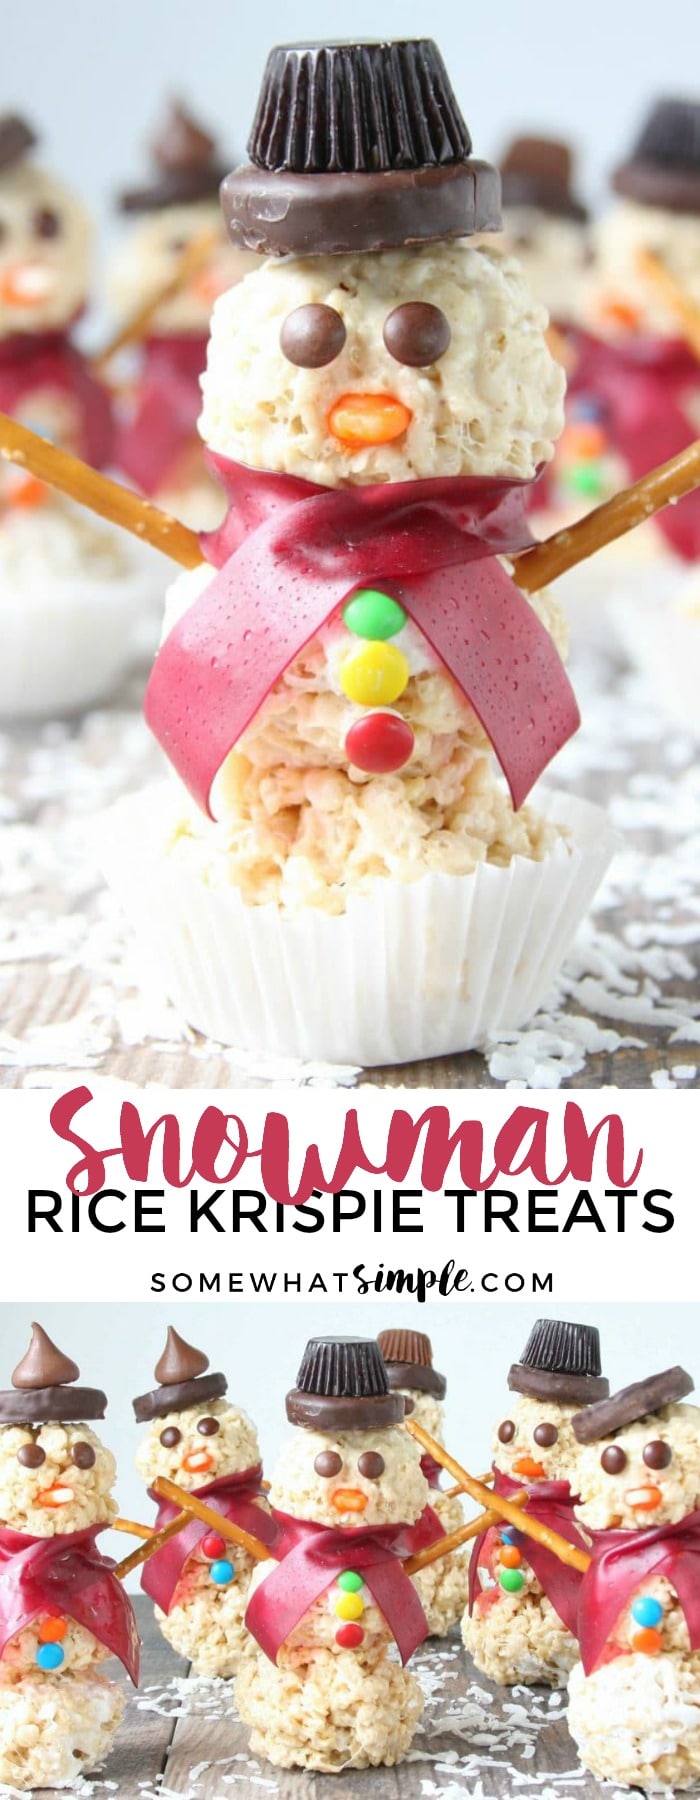 Snowman Rice Krispie Treats with m&m eyes and buttons of different colors and a hat made of a reese's peanut butter cup. It also has pretzel sticks for arms and a red fruit roll up as a scarf.